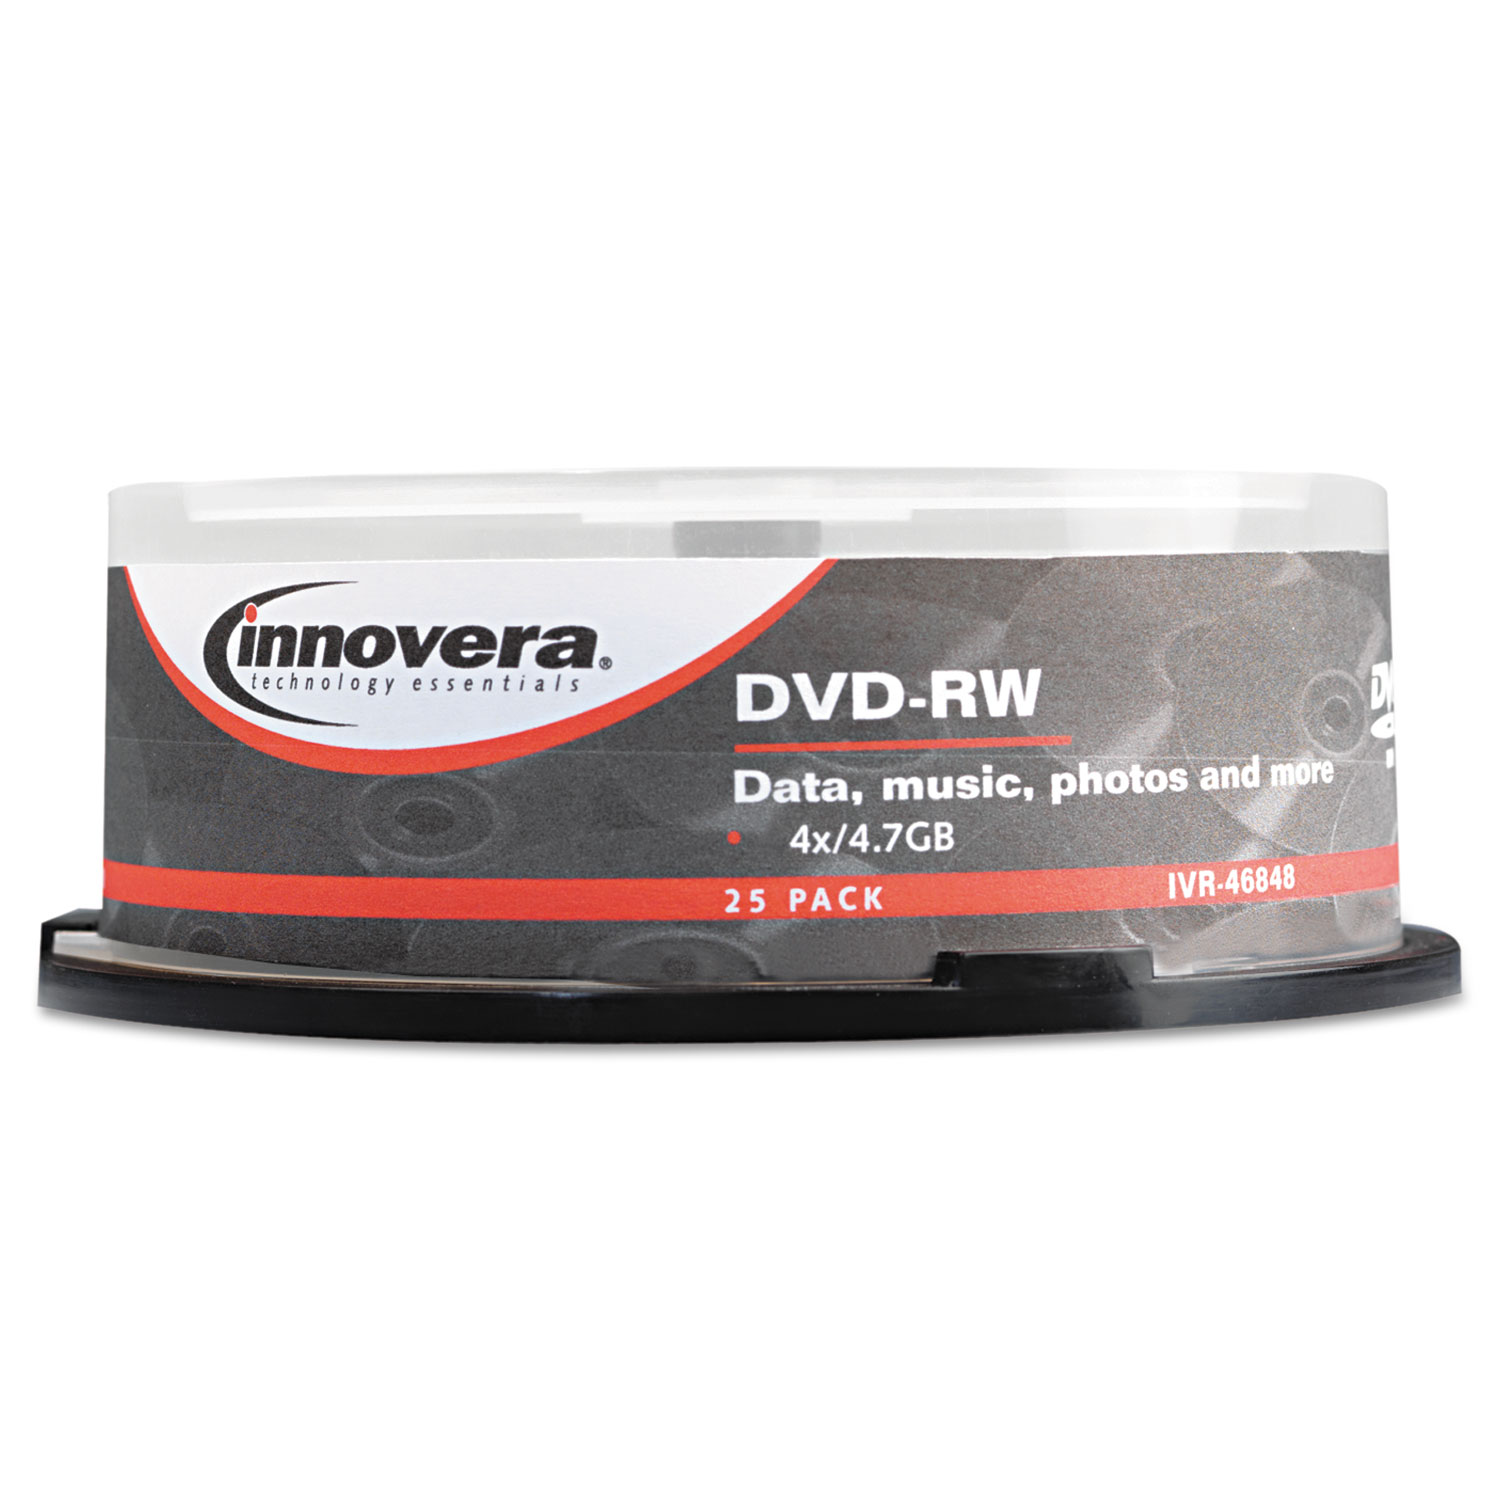  Innovera IVR46848 DVD-RW Discs, 4.7GB, 4x, Spindle, Silver, 25/Pack (IVR46848) 